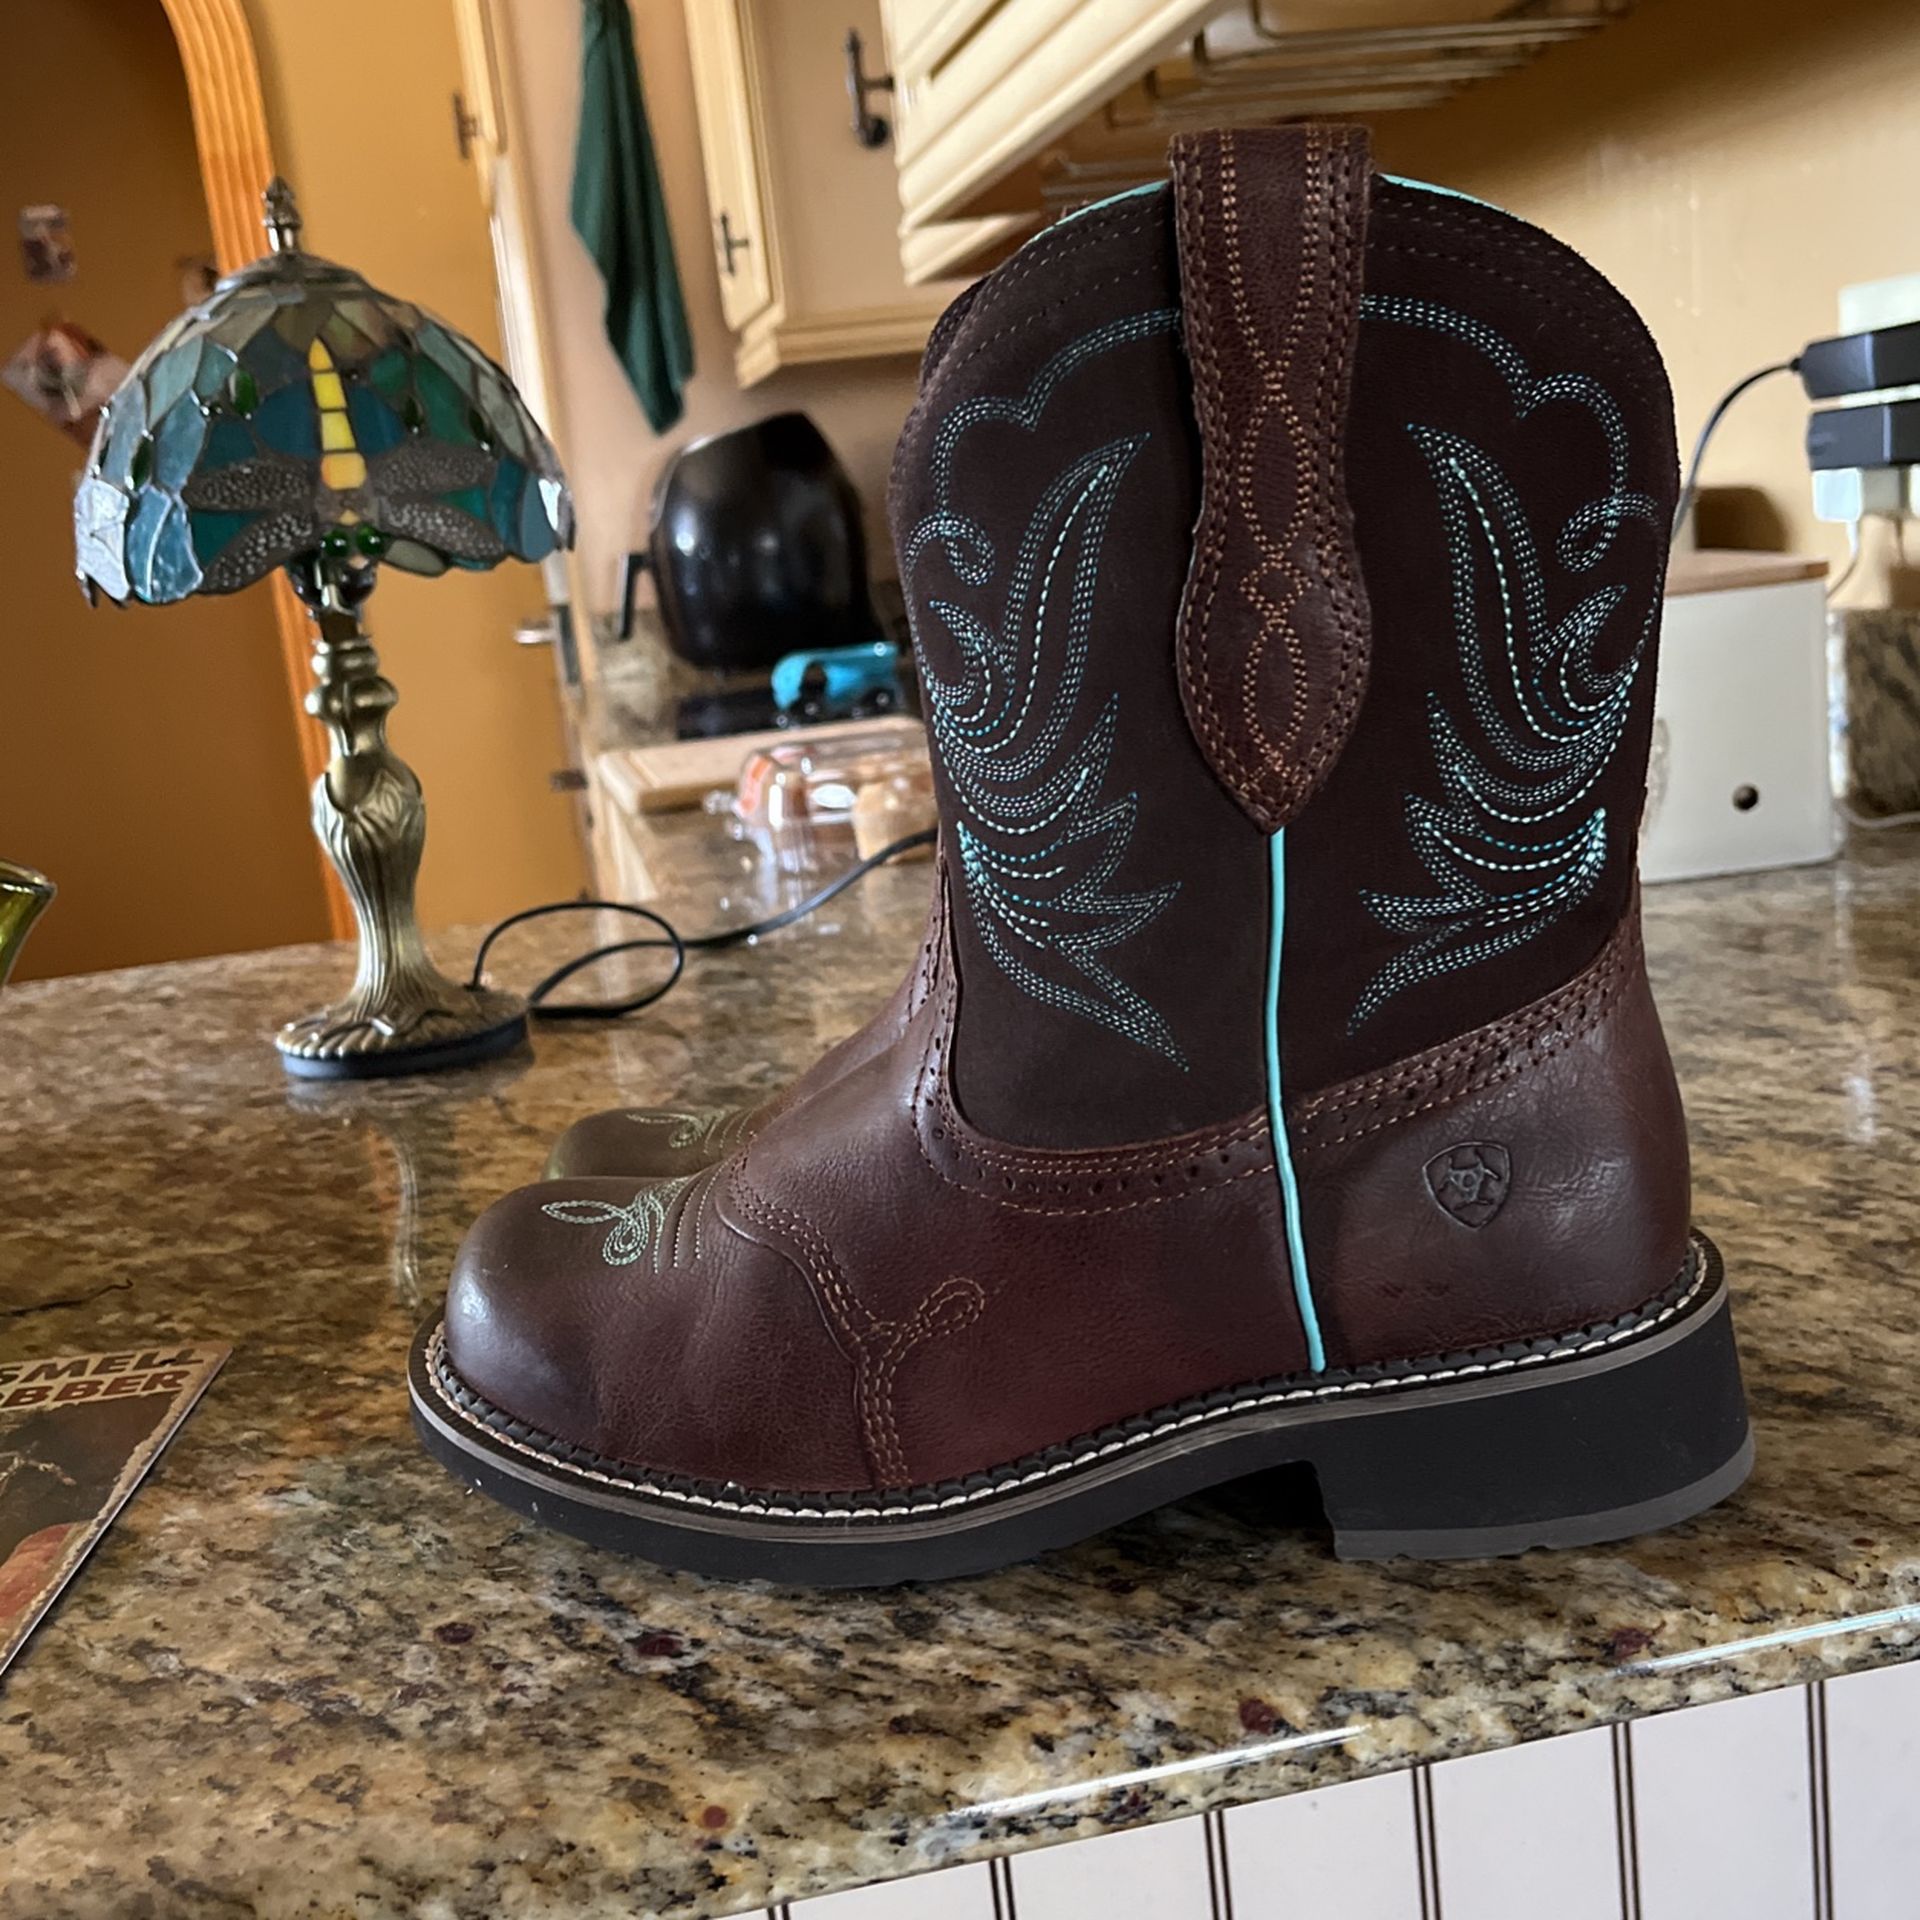 Ariat  Fatbaby Boots 9.5 C